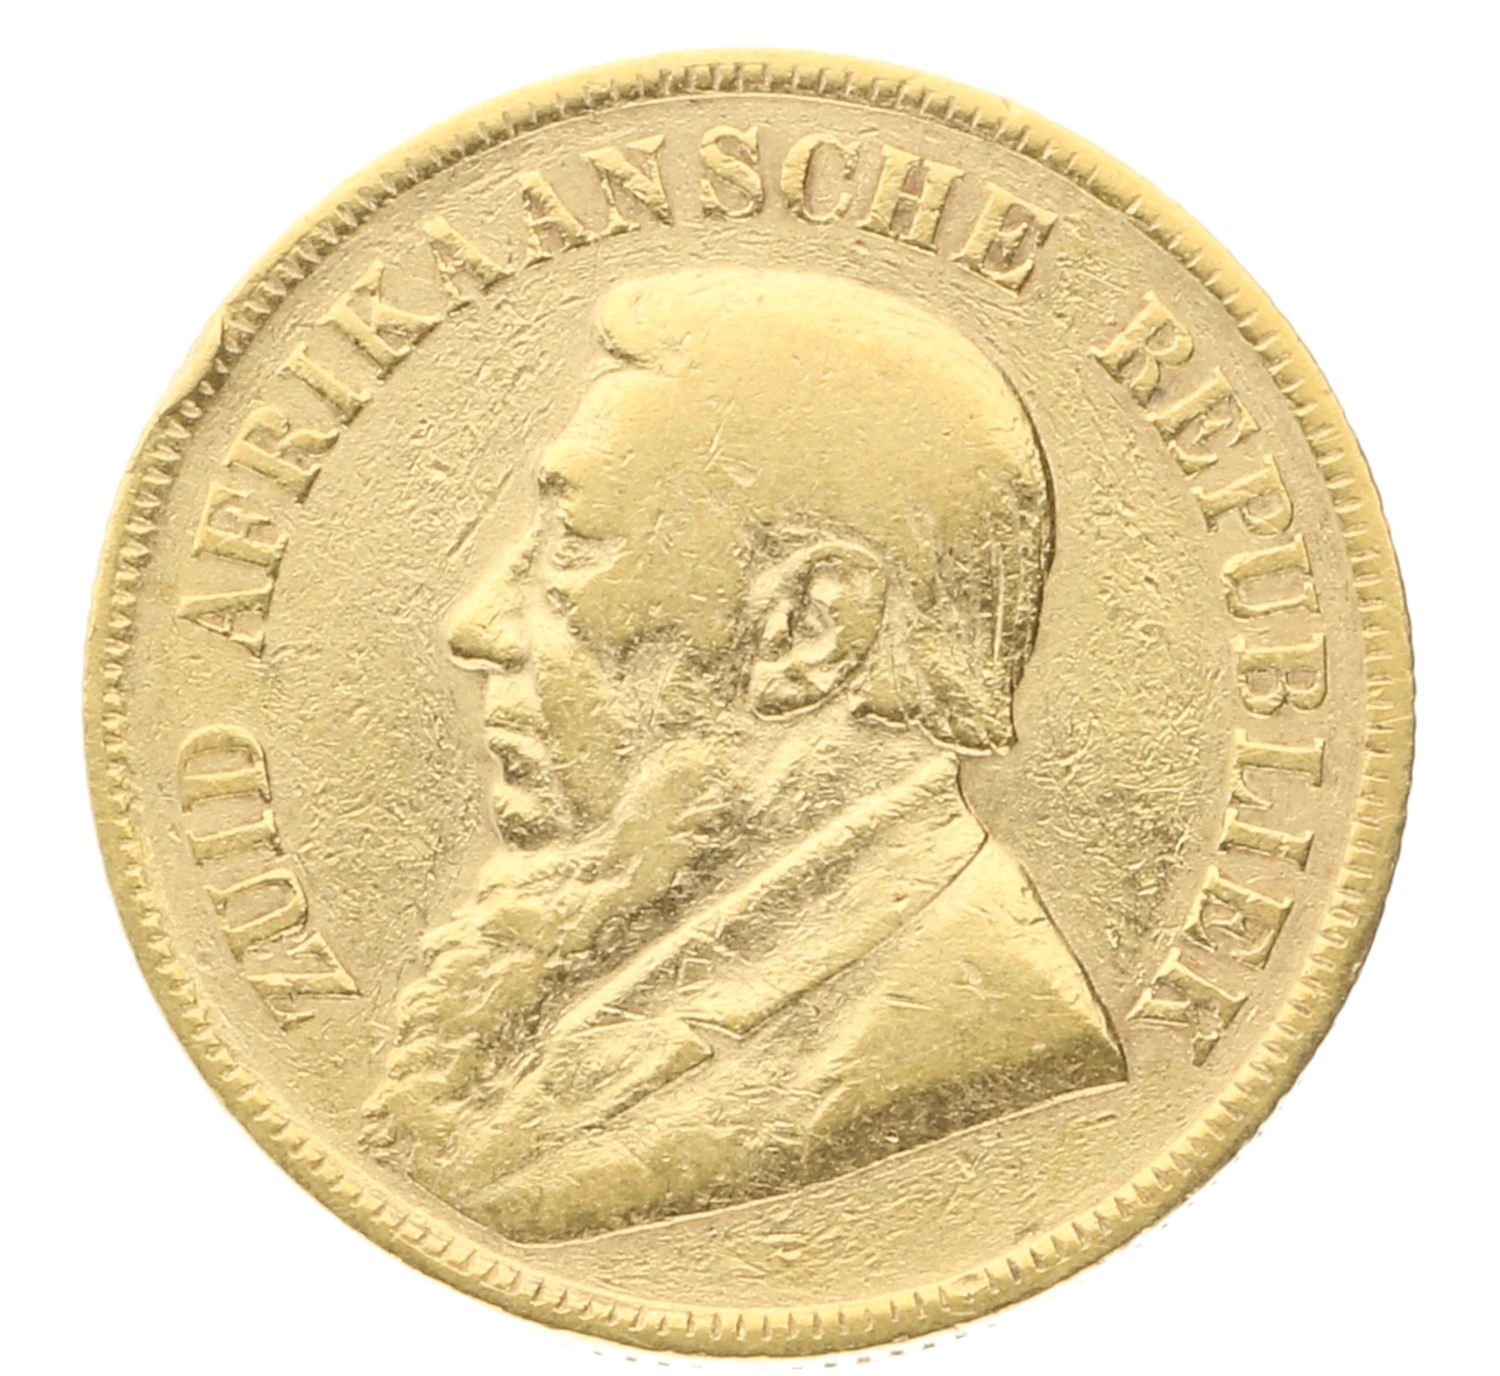 Pound - South Africa - 1897